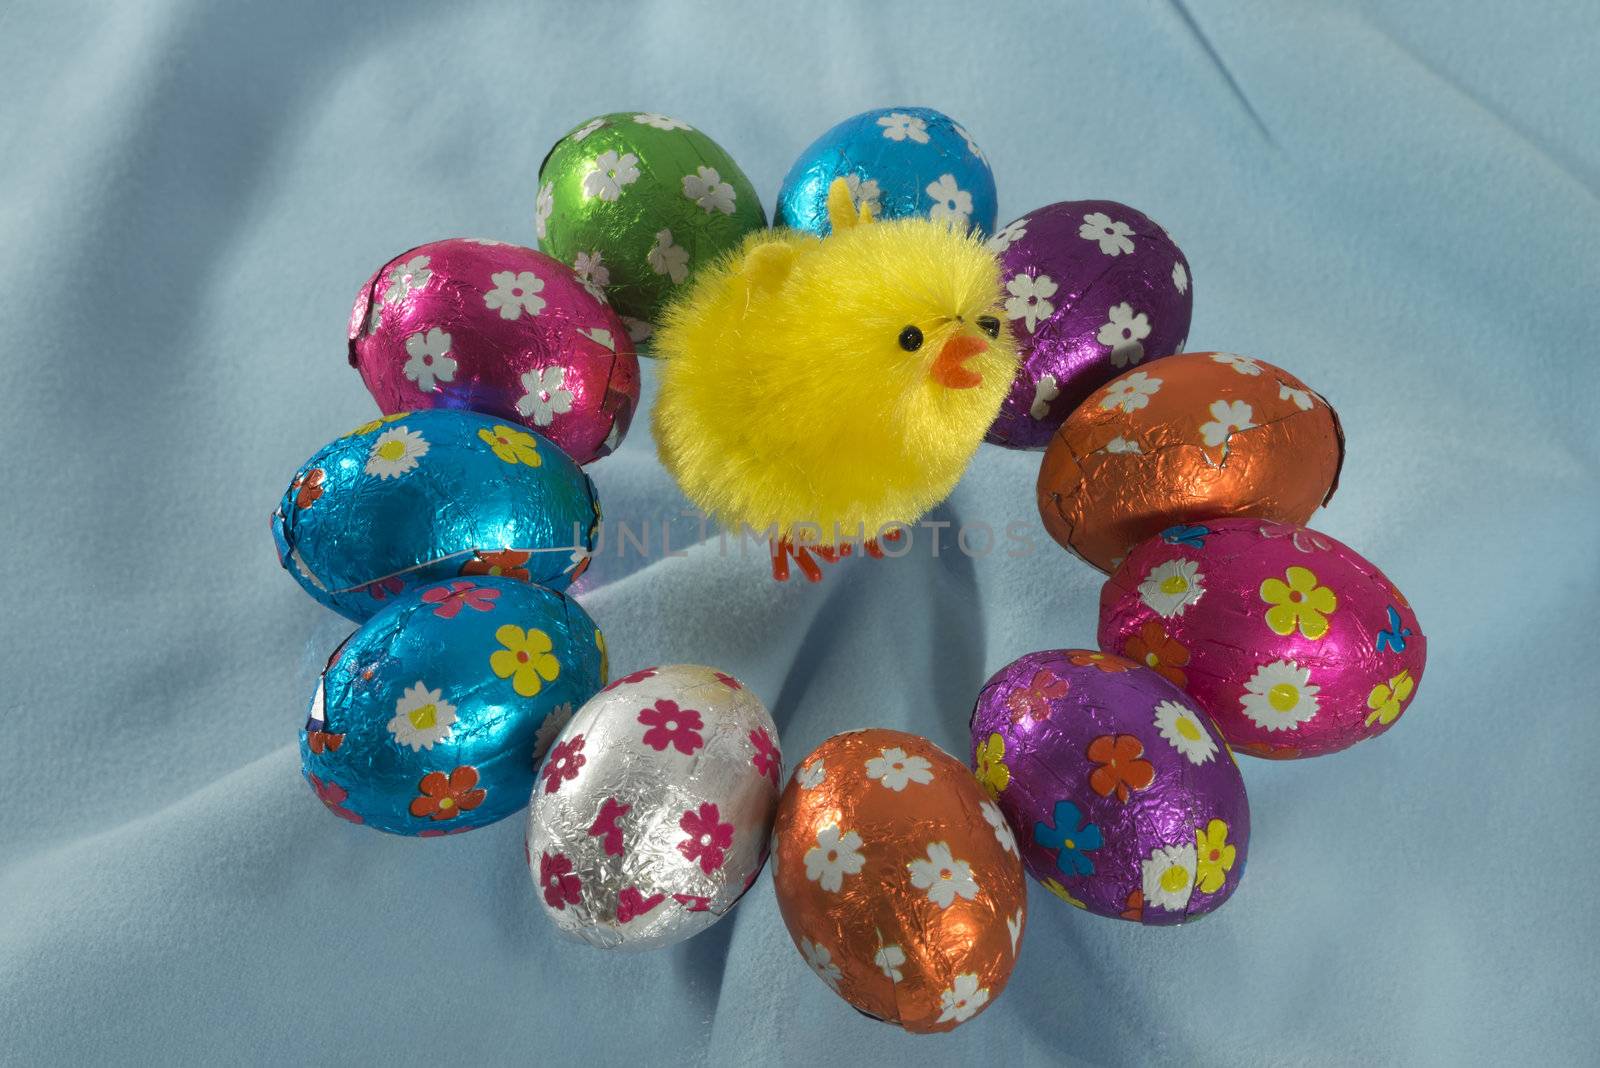 Easter chicks surrounded by chocolate eggs on blue